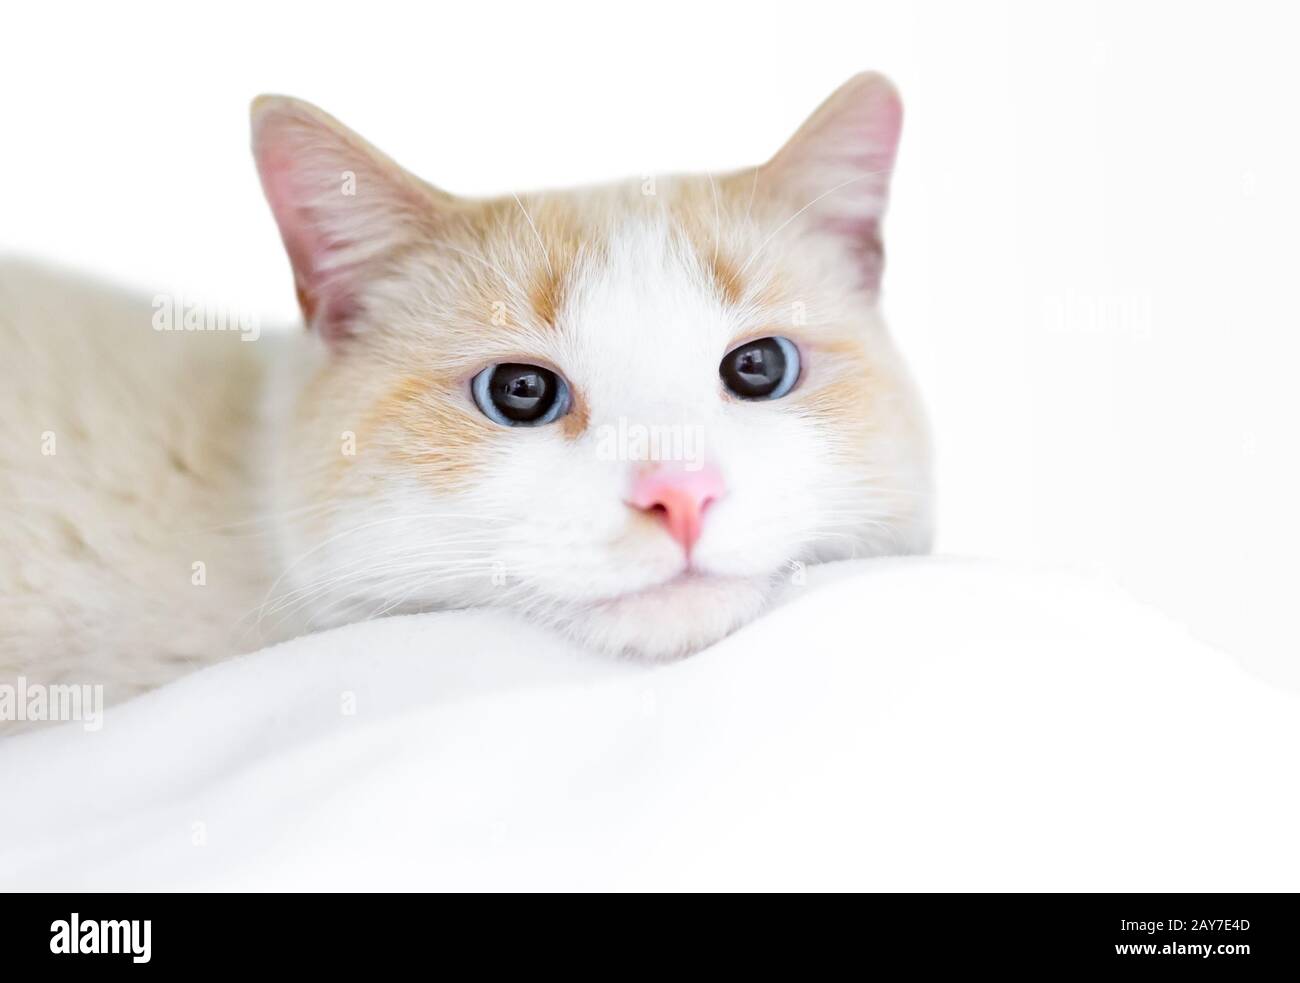 A domestic shorthair cat resting its head on a soft blanket Stock Photo